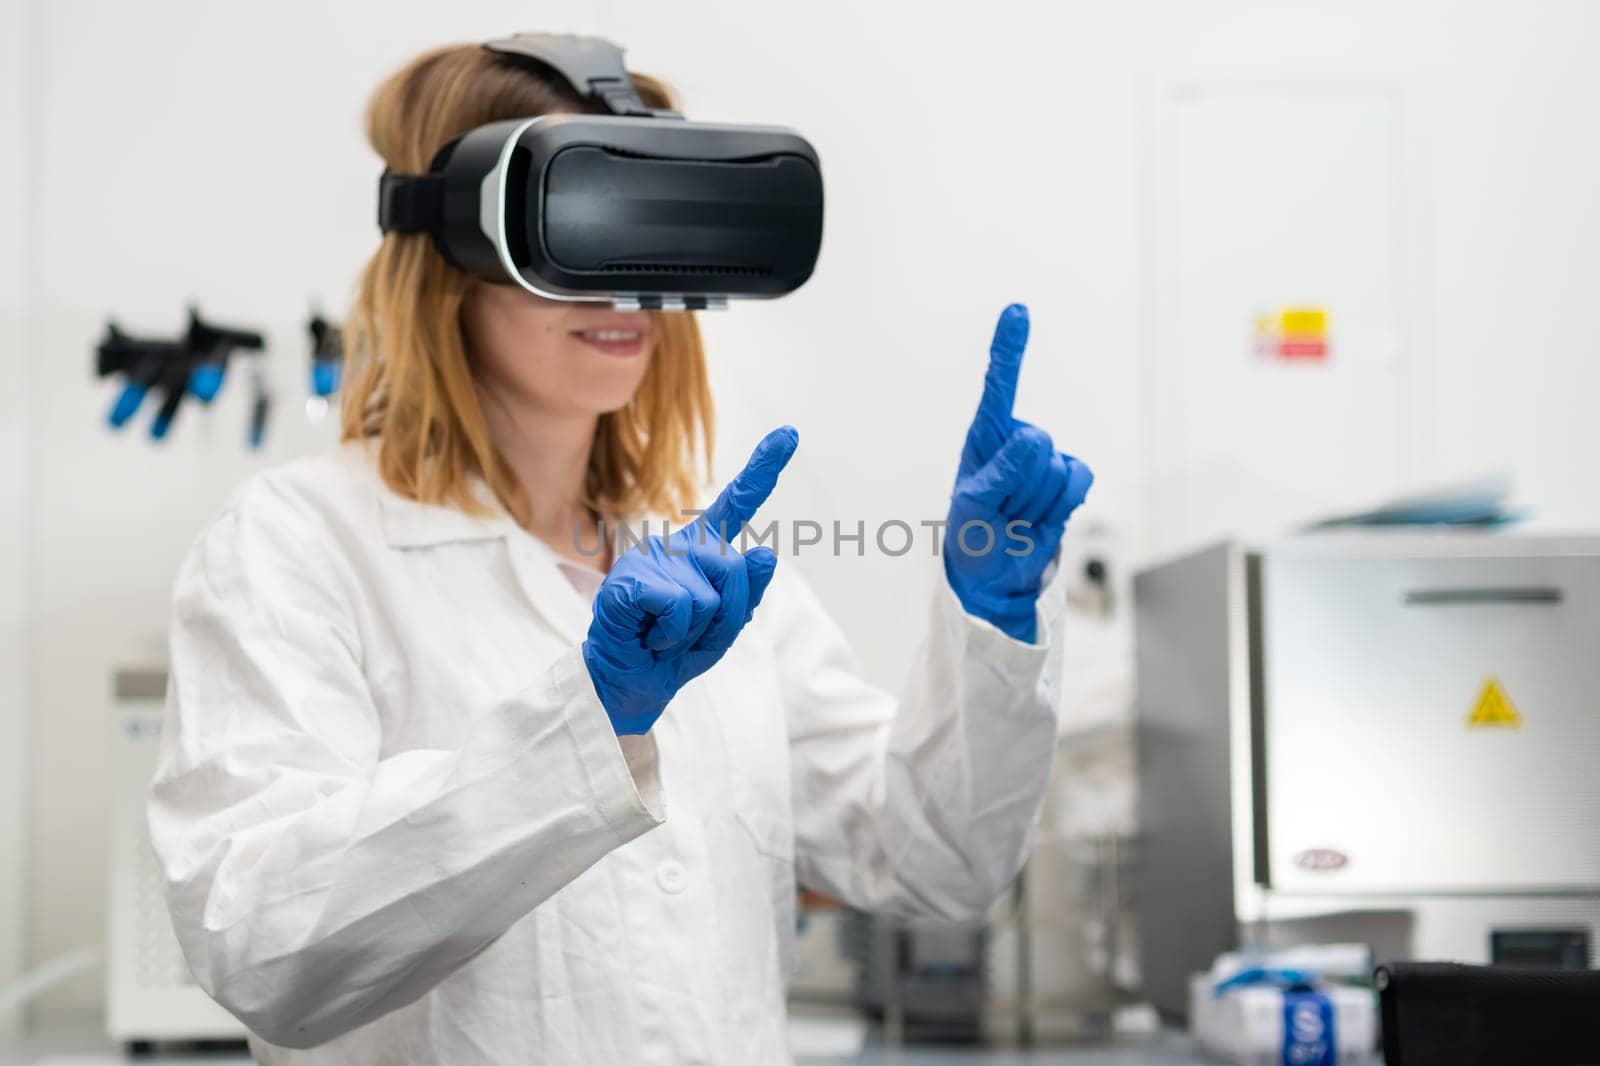 Scientist in VR googles, lab coat and rubber gloves manages the virtual interface by vladimka